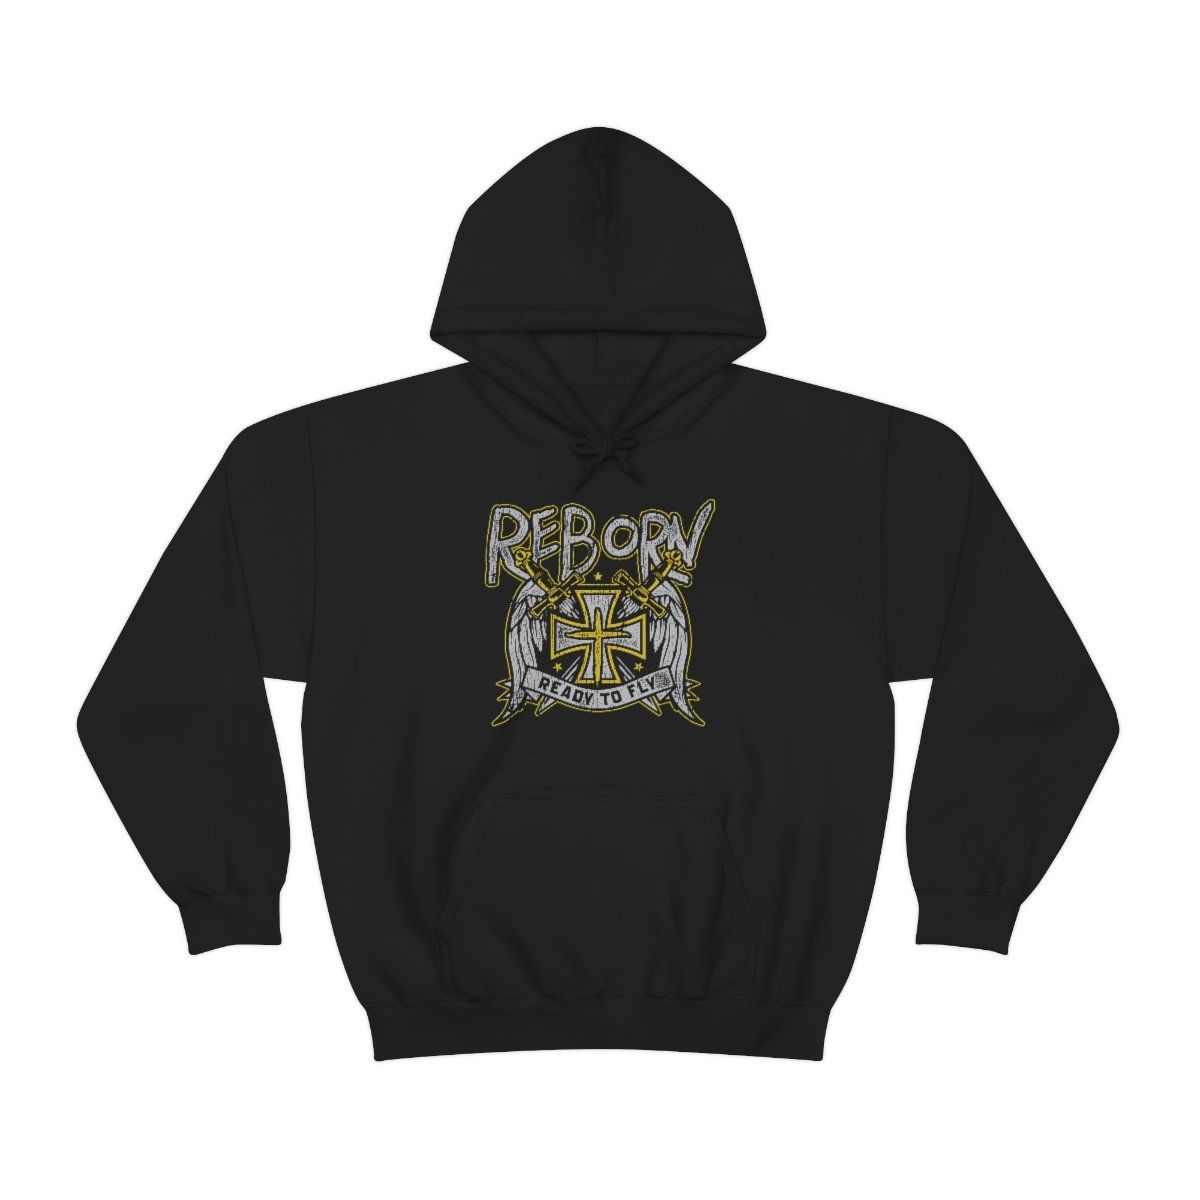 Reborn – Ready to Fly Pullover Hooded Sweatshirt